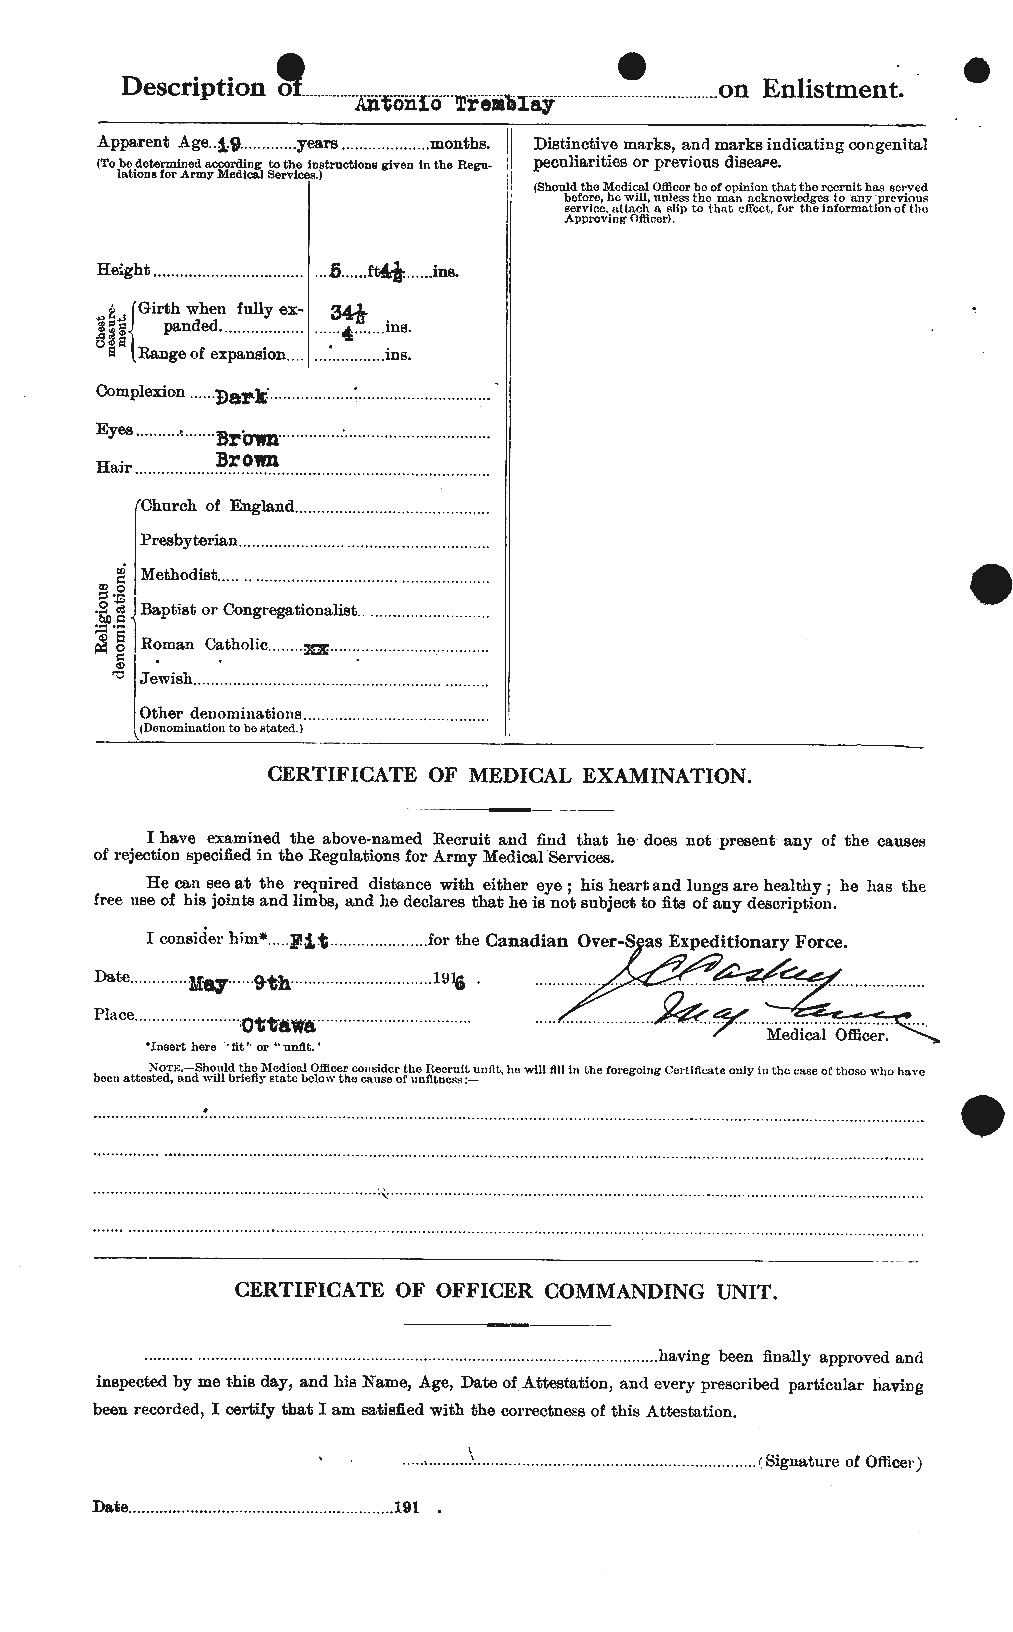 Personnel Records of the First World War - CEF 638946b